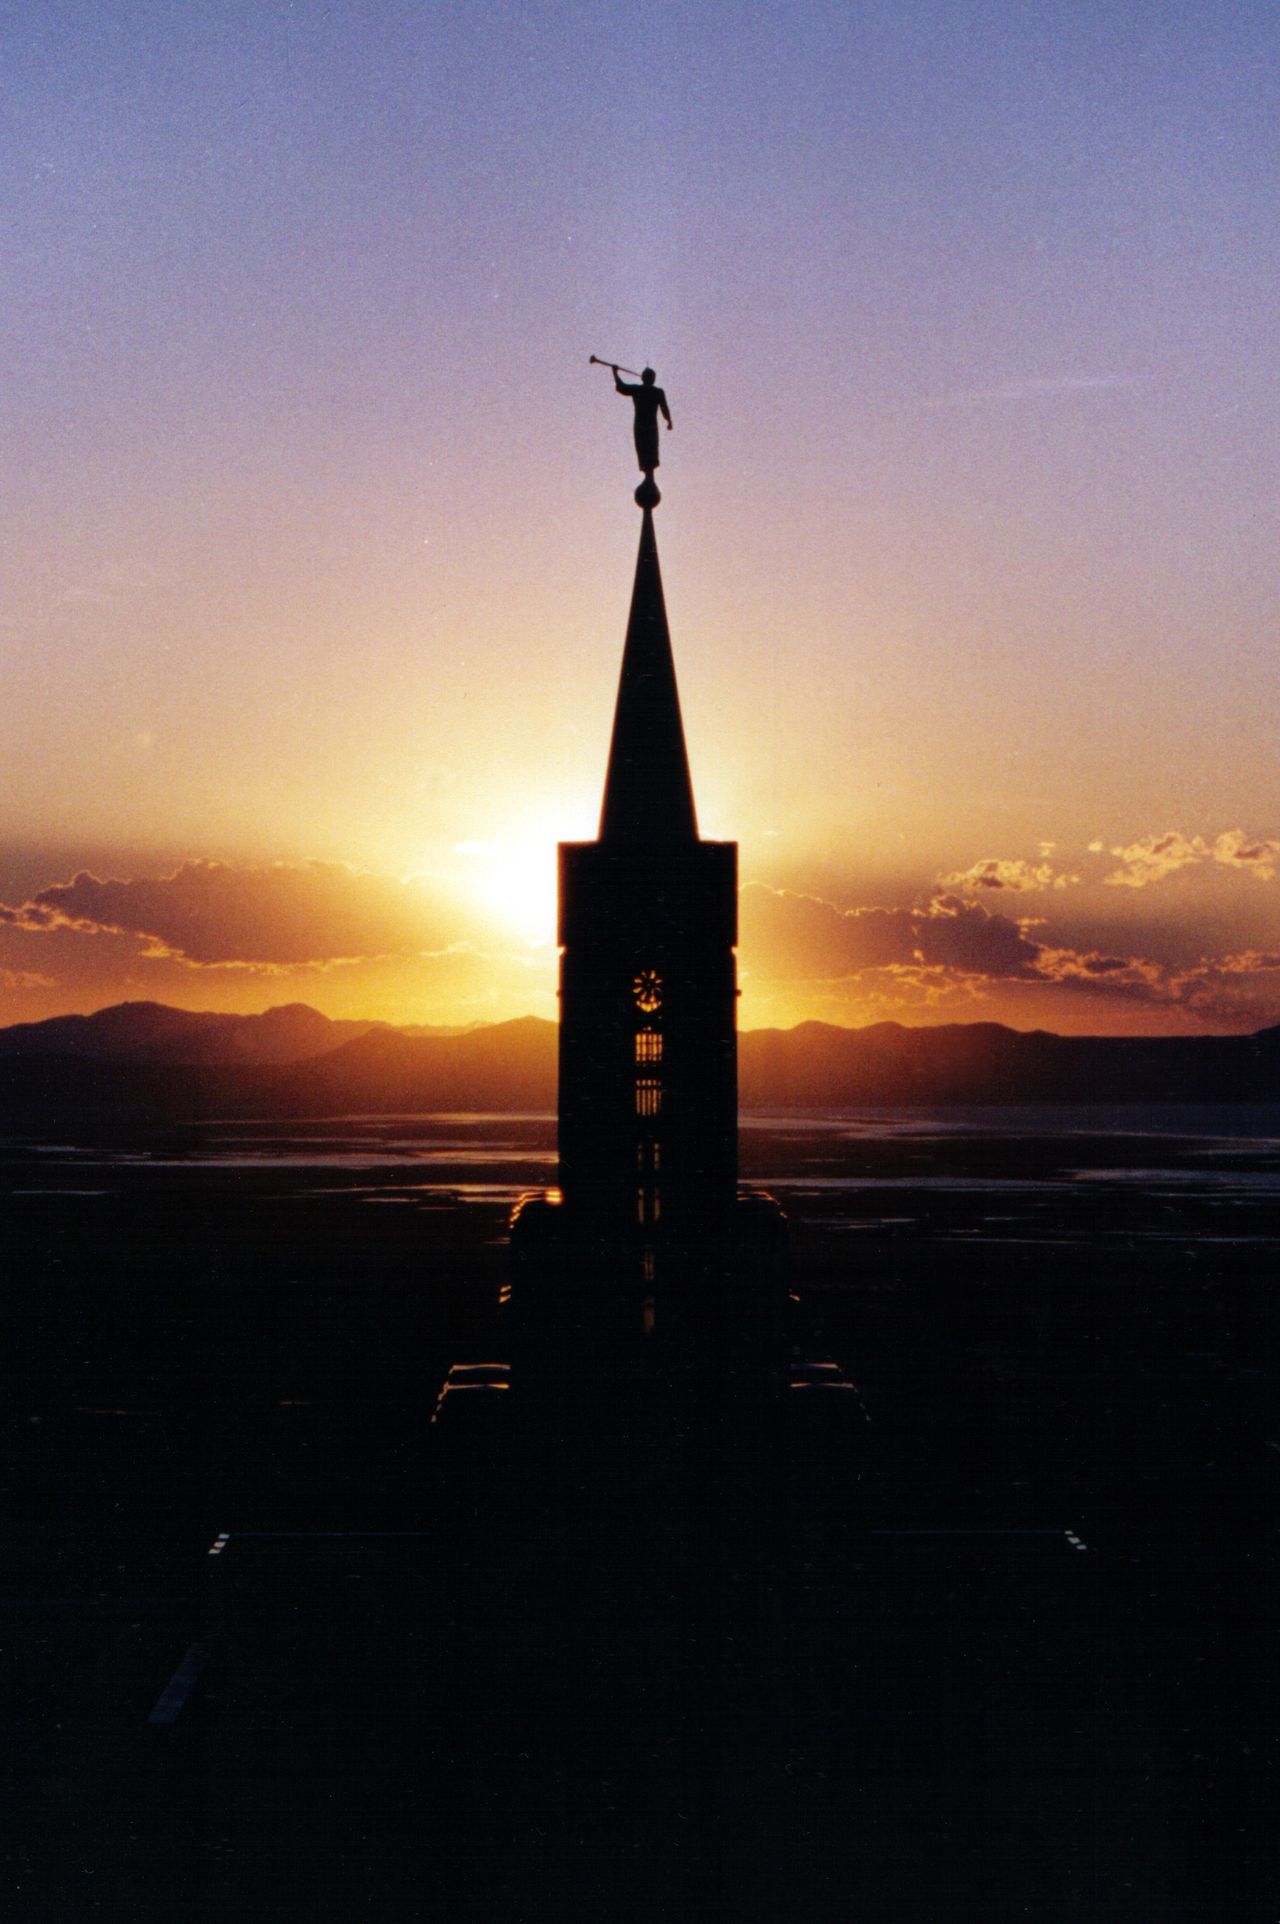 The spire on the Bountiful Utah Temple, silhouetted against the sunset.